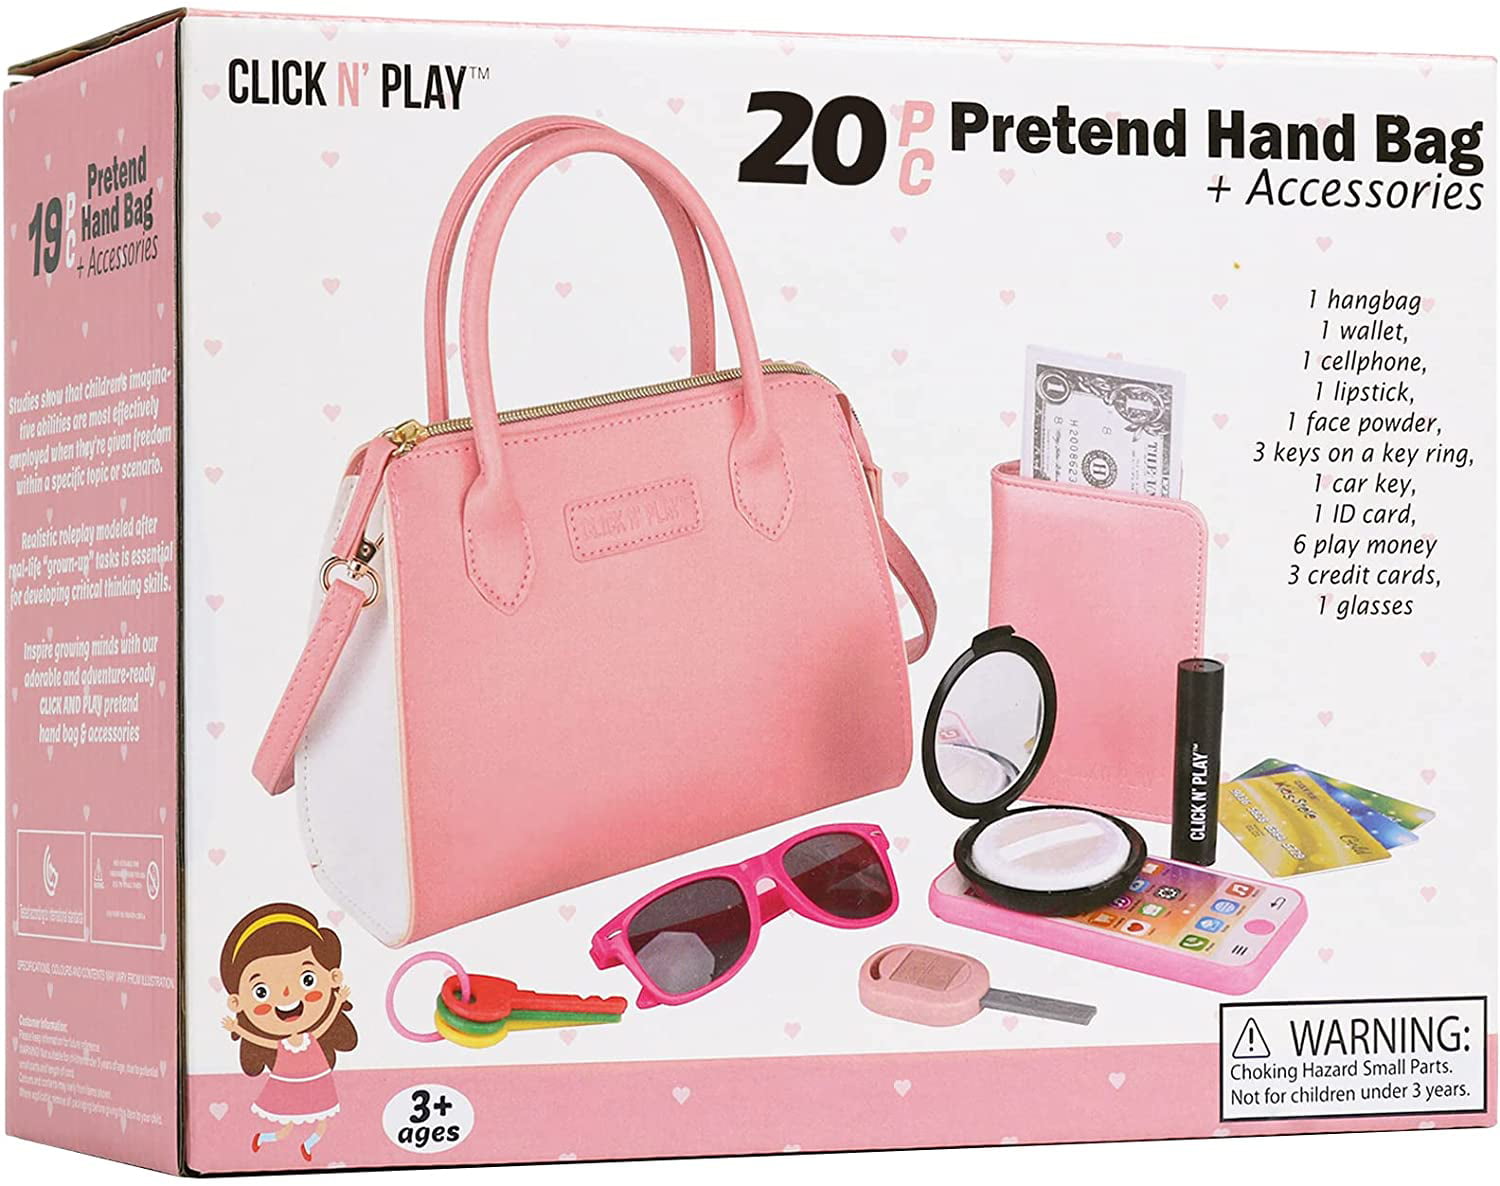  Oisacirg Play Purse for Little Girls, 35PCS Toddler Purse with  Pretend Makeup for Toddlers, Princess Toys Includes Handbag, Phone, Wallet,  Camera, Keys, Kids Purse Birthday Gift for Girls Age 3 4